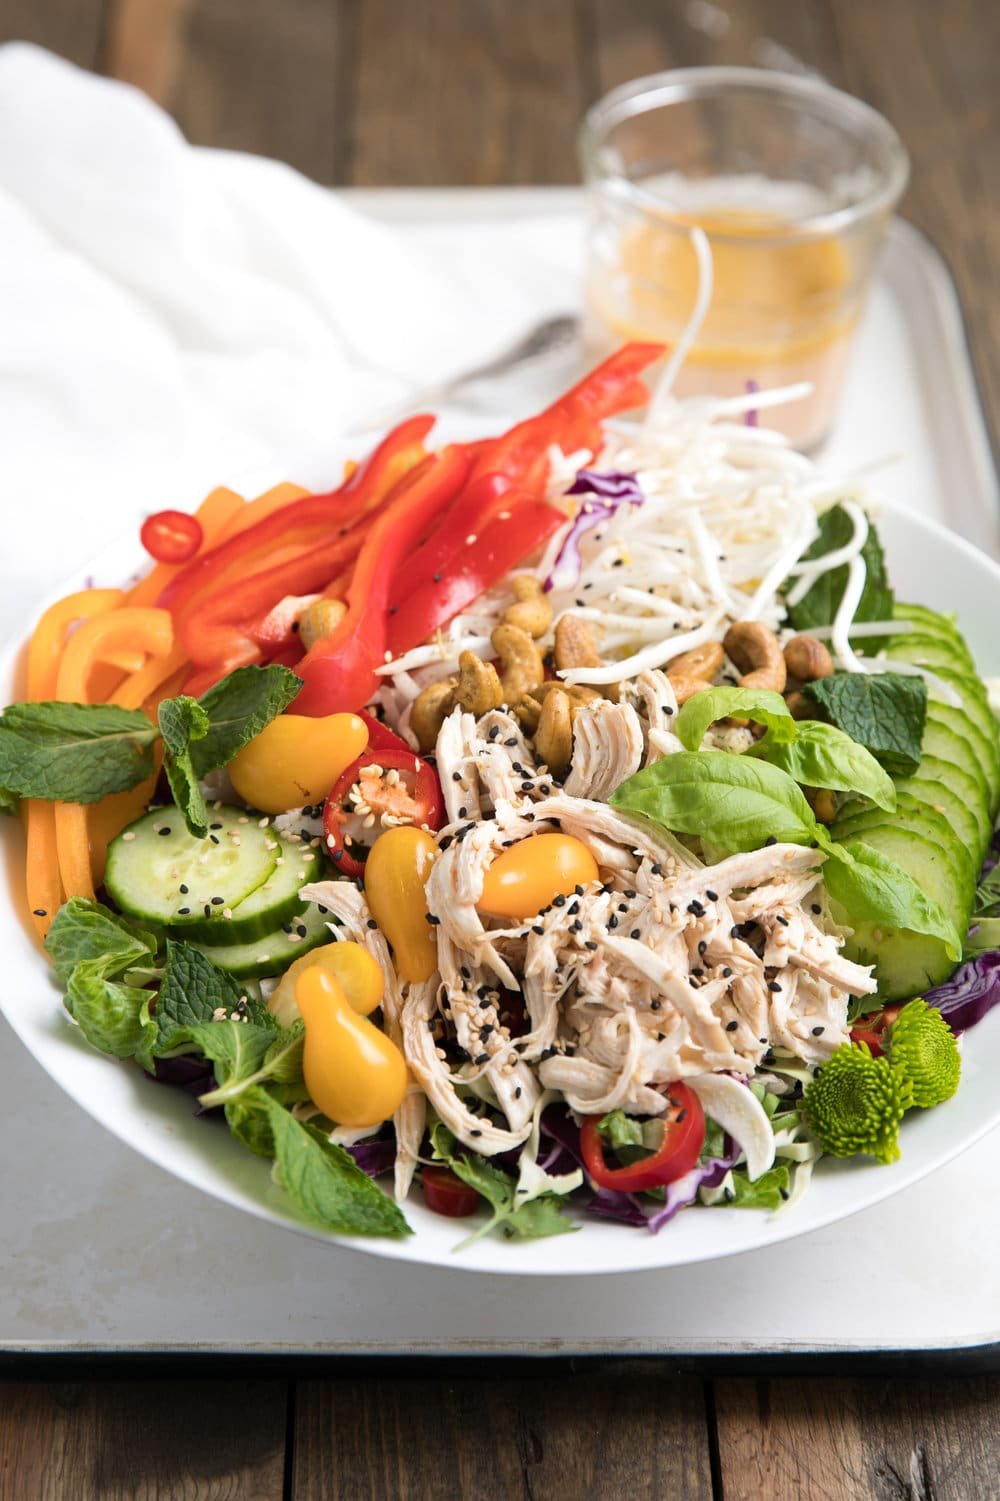 Fresh, healthy and so easy to throw together, this Easy Asian Chopped Chicken Salad with homemade Sesame Ginger Vinaigrette makes a perfect lunch or dinner option.